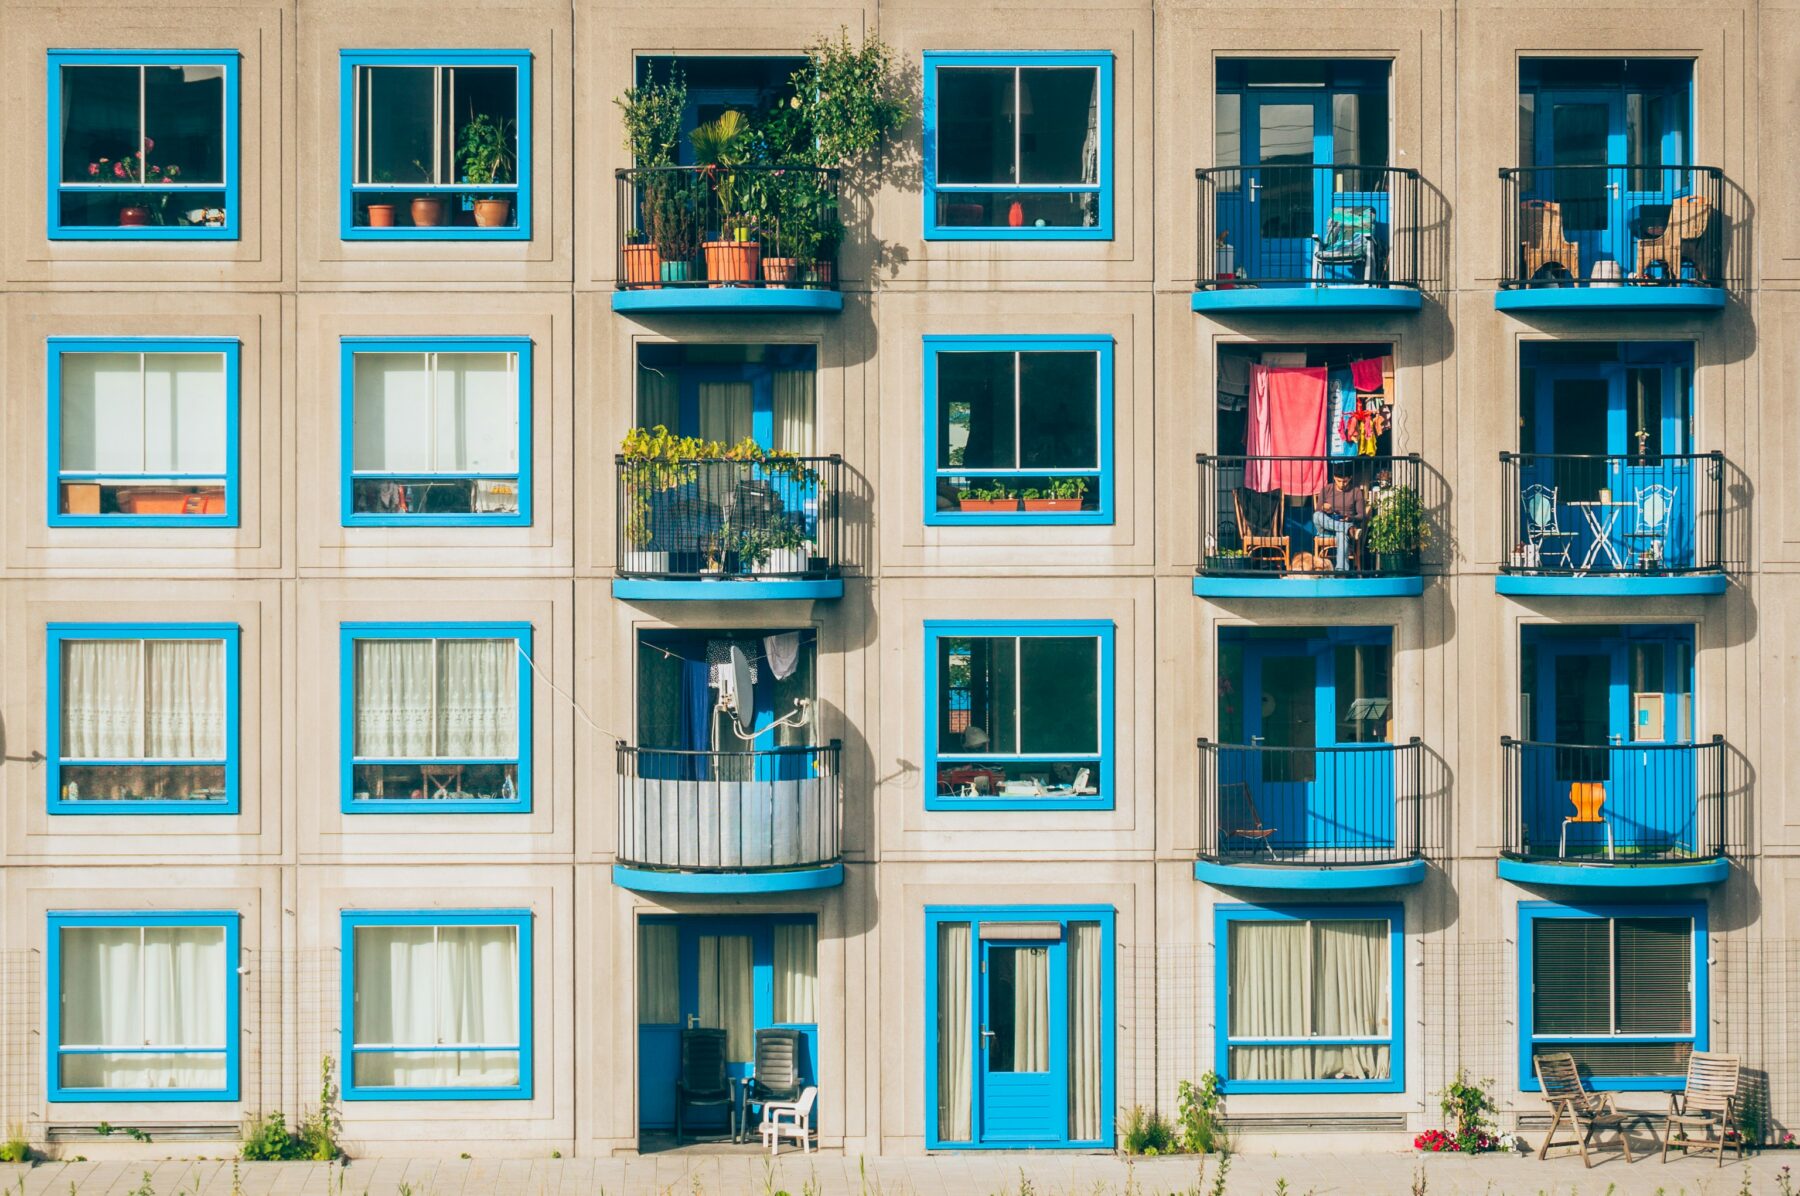 beige facade building with baby blue window trims and balconies with plants-types of liens article